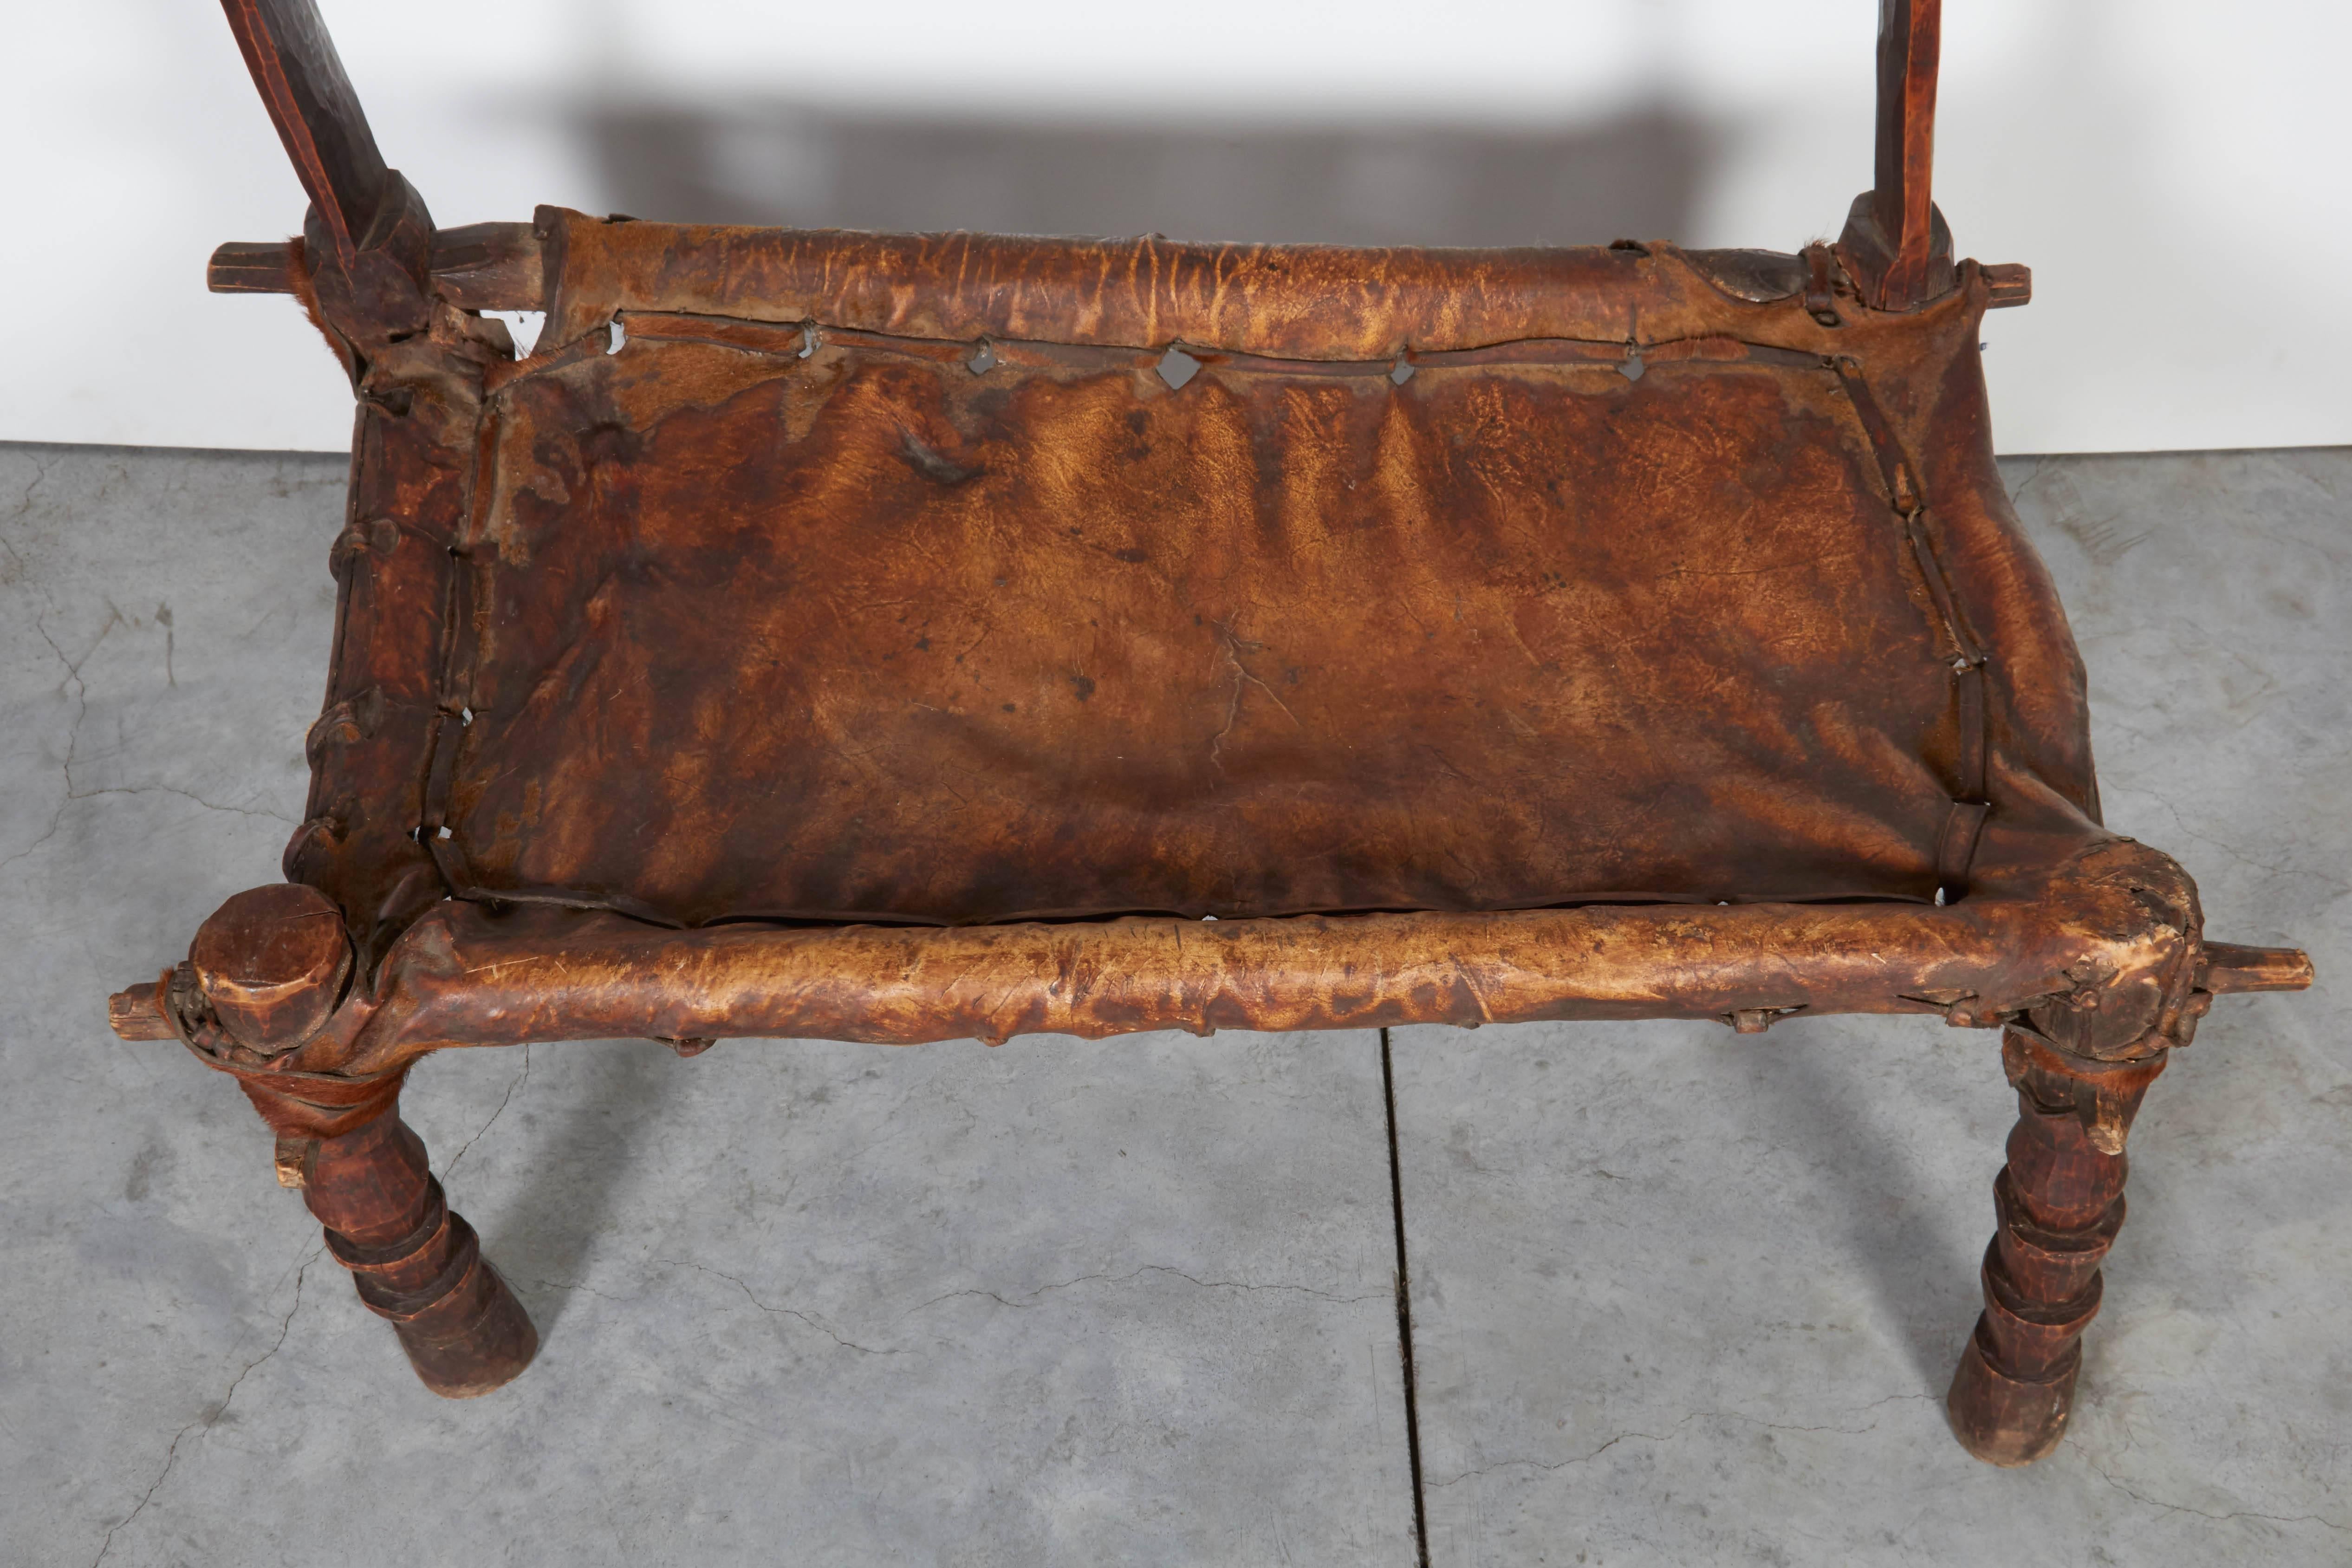 Ethiopian Rustic Antique Wood and Leather Bench with Great Patina and Character For Sale